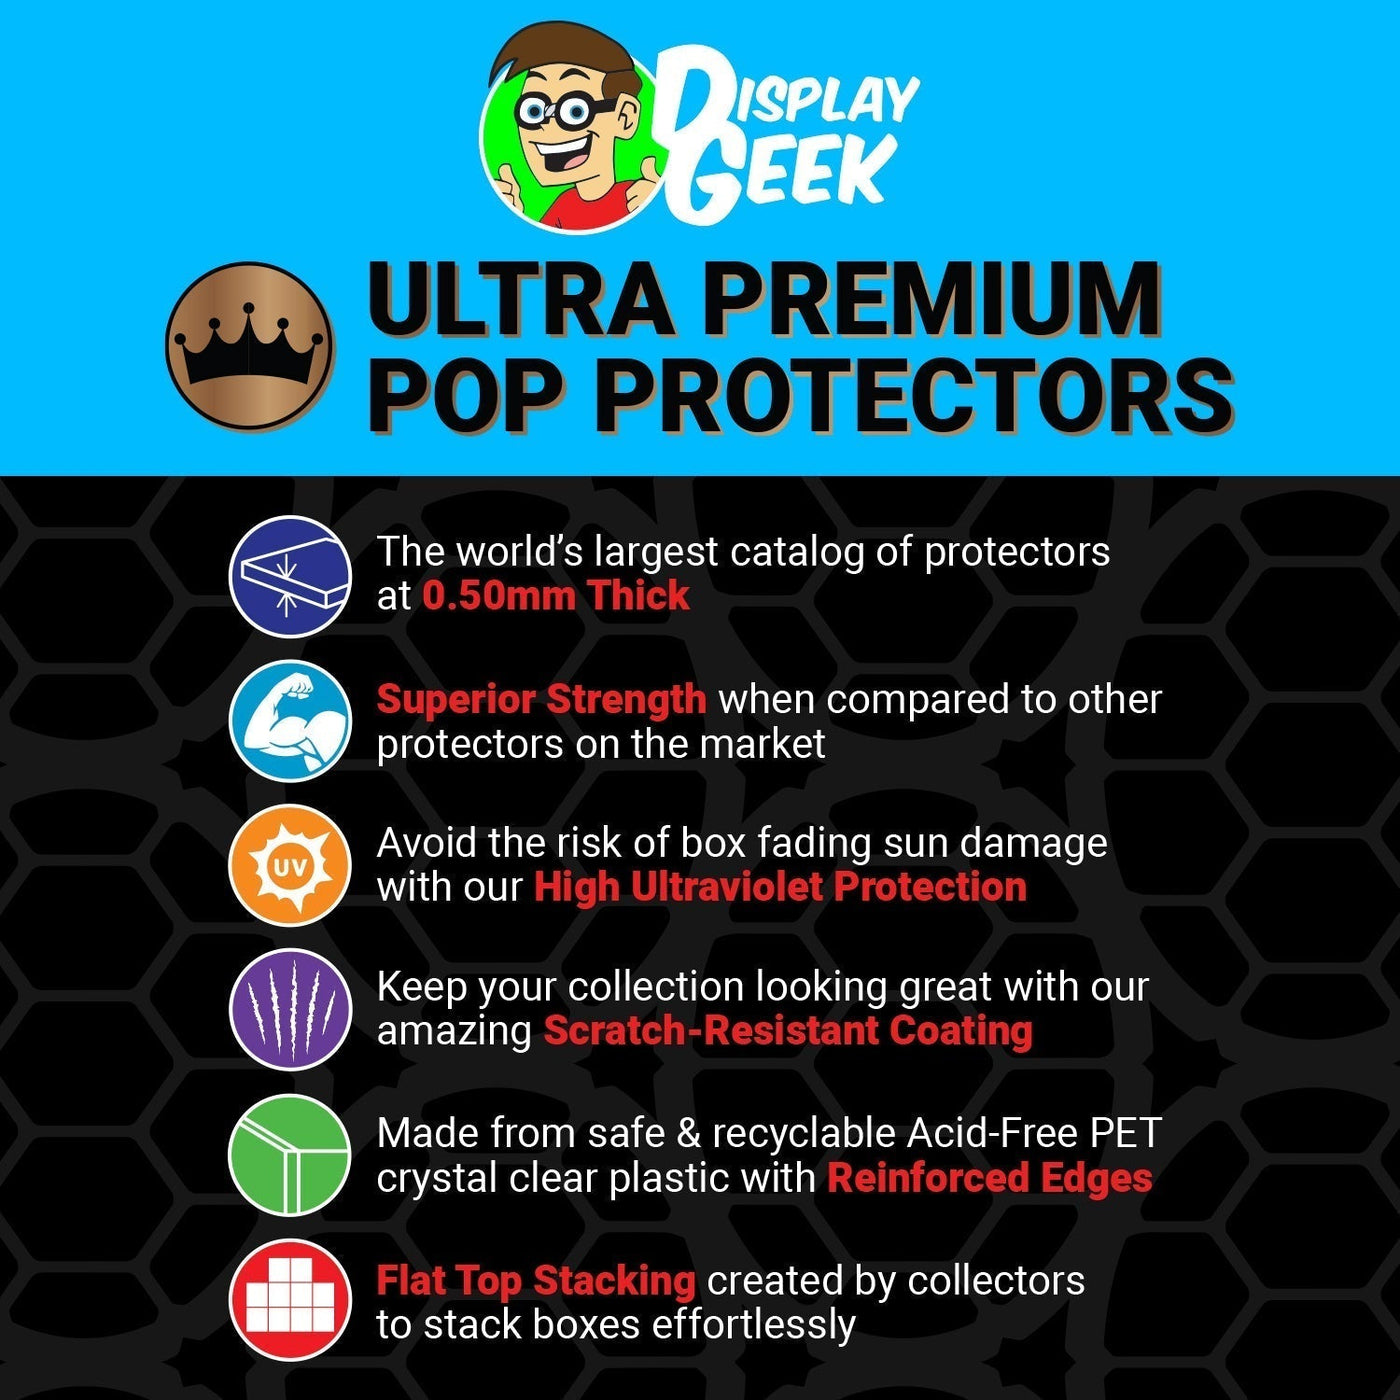 Pop Protector for 6 inch Hulk with Infinity Gauntlet #478 Super Funko Pop on The Protector Guide App by Display Geek